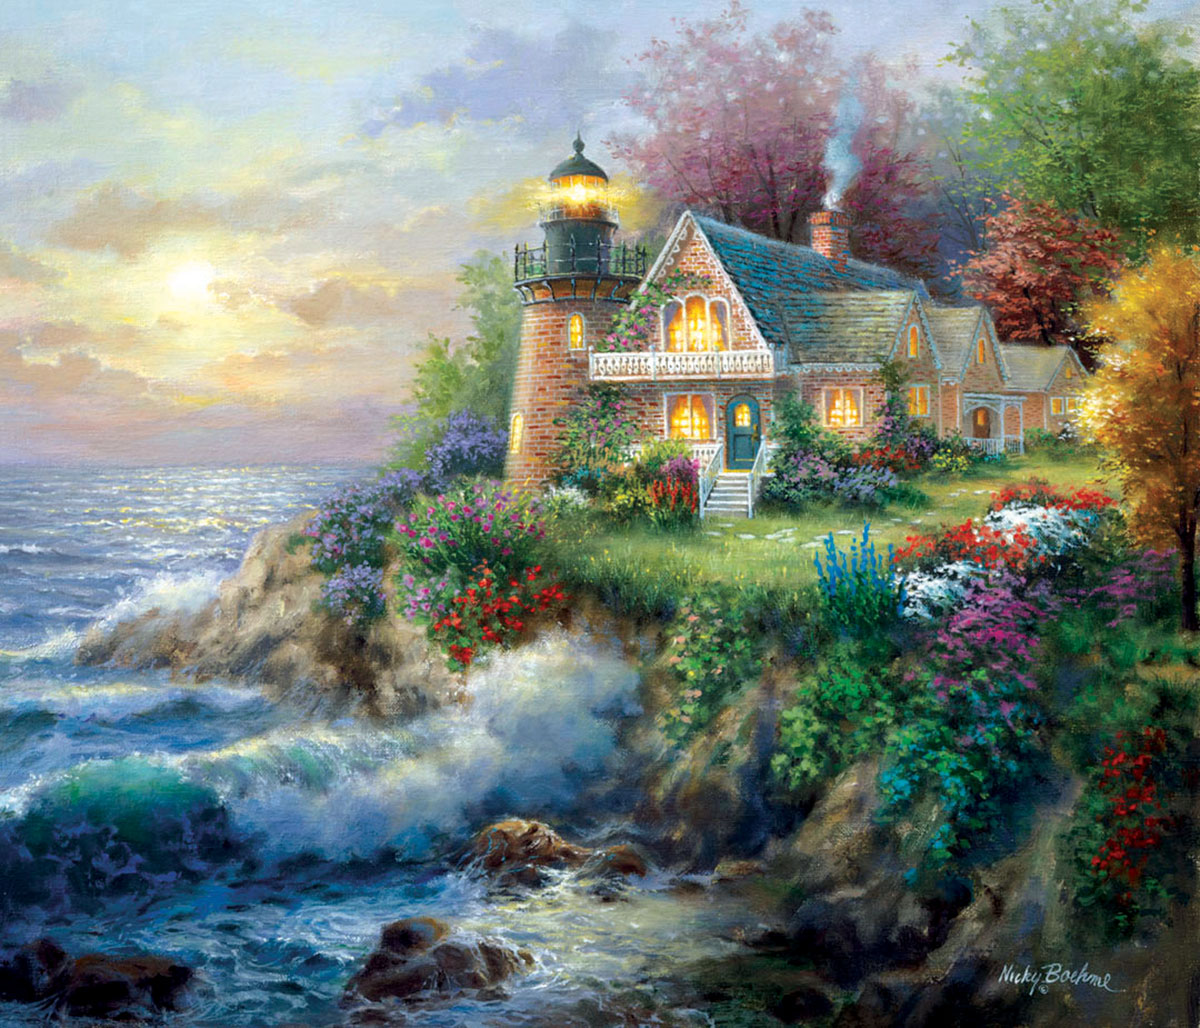 Lighthouse by the Sea Summer Jigsaw Puzzle By SunsOut